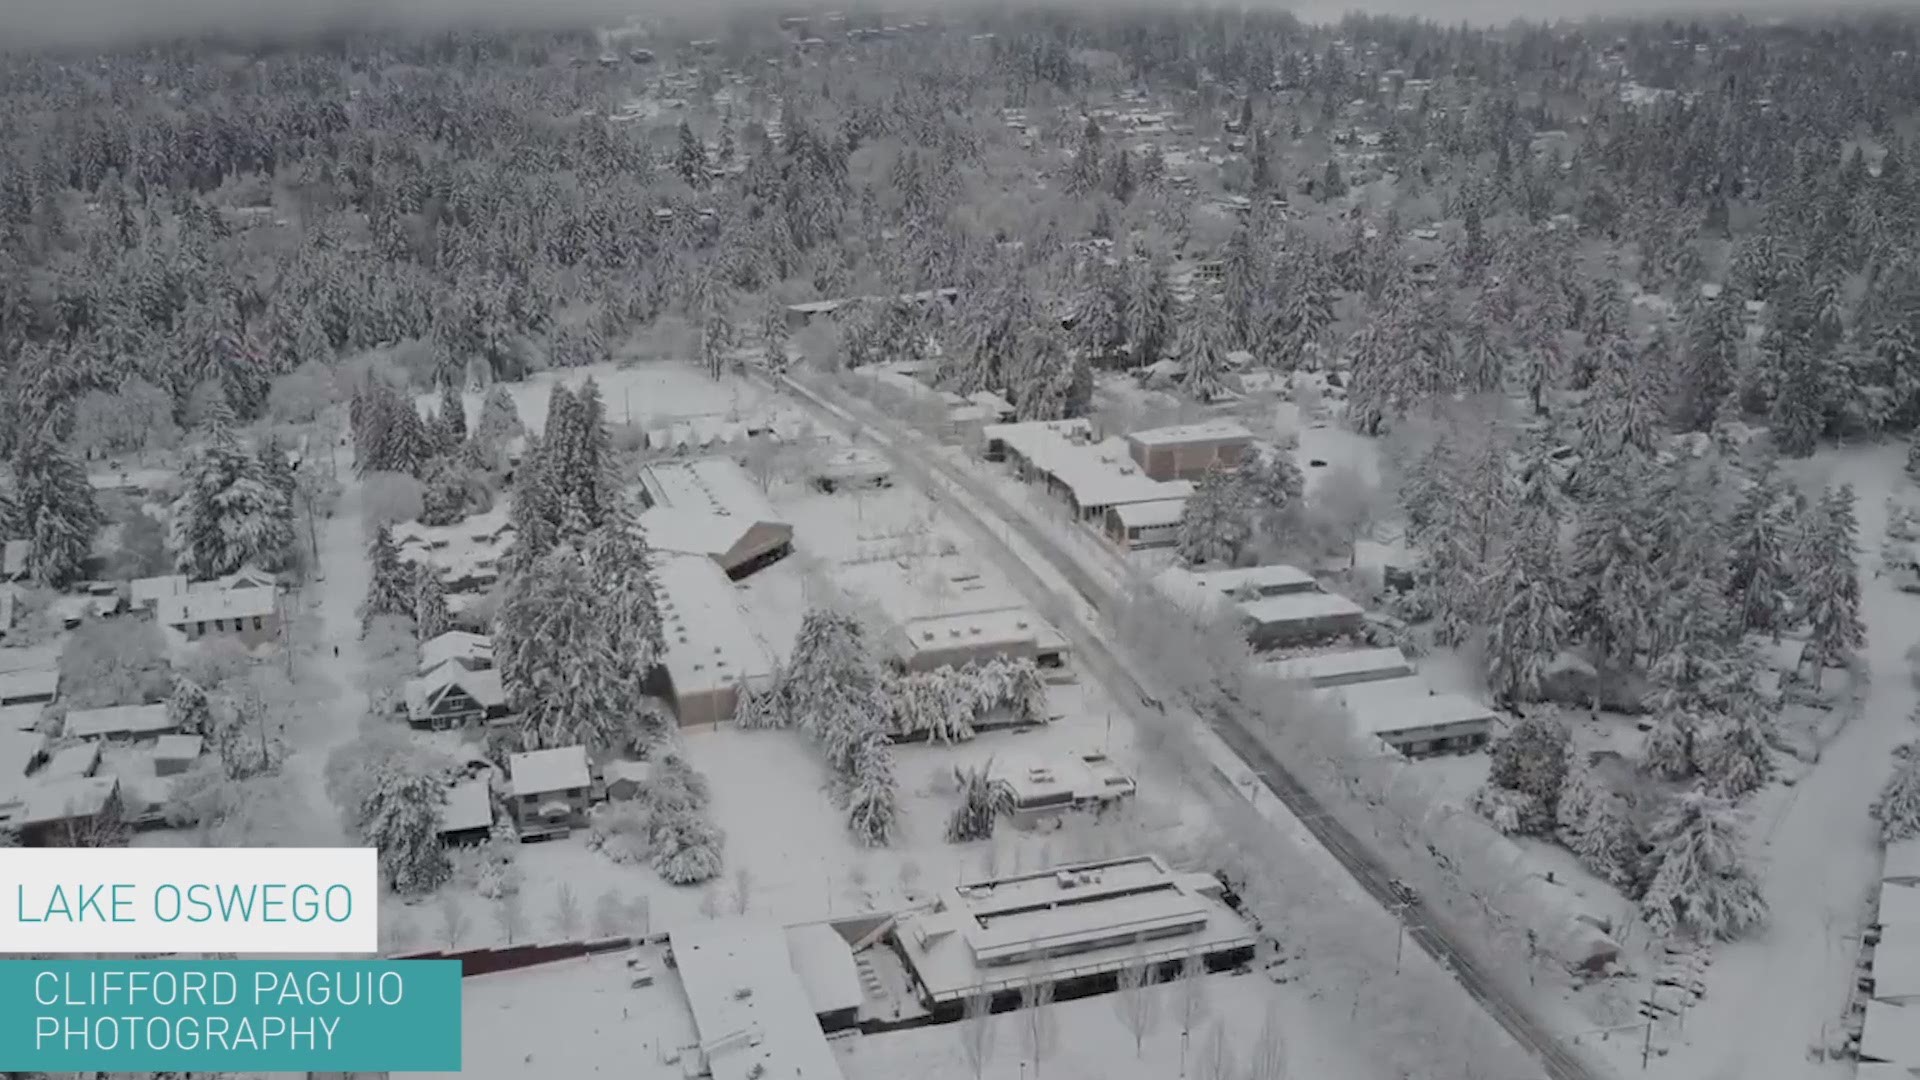 Combined drone footage from local residents of a snow-covered metro area, Jan. 11 and 12, 2017, KGW